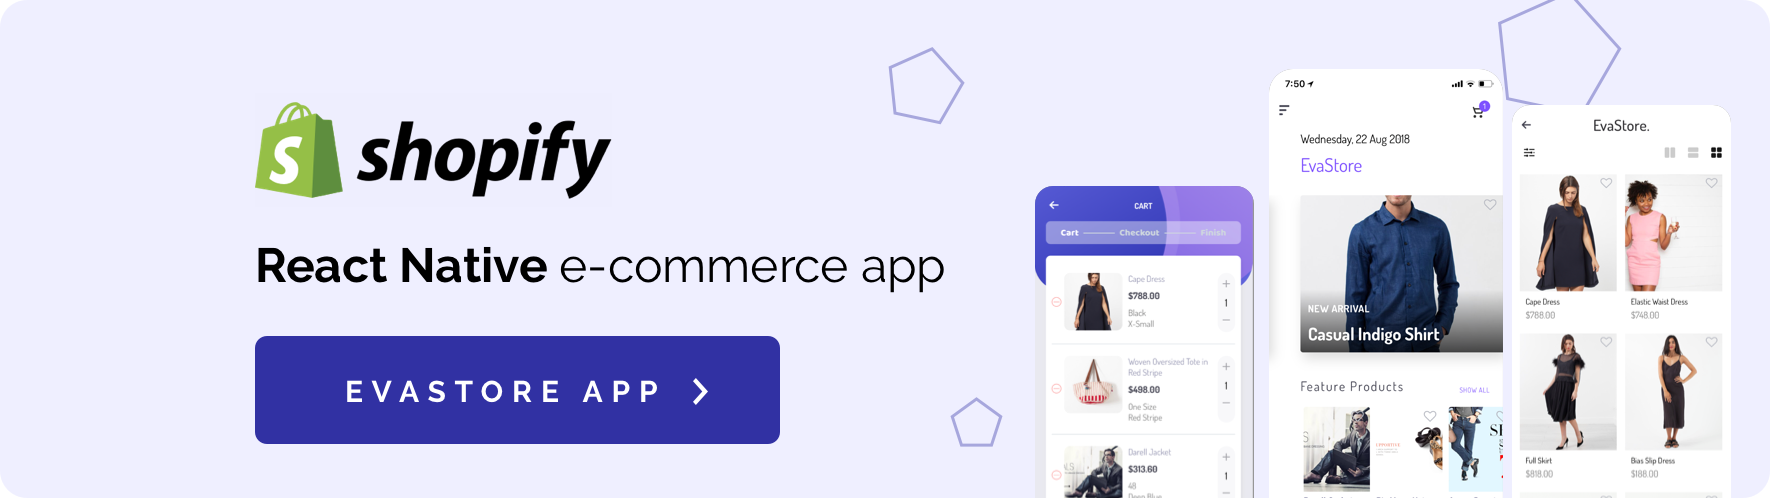 Mstore Shopify - Complete React Native template for e-commerce - 15